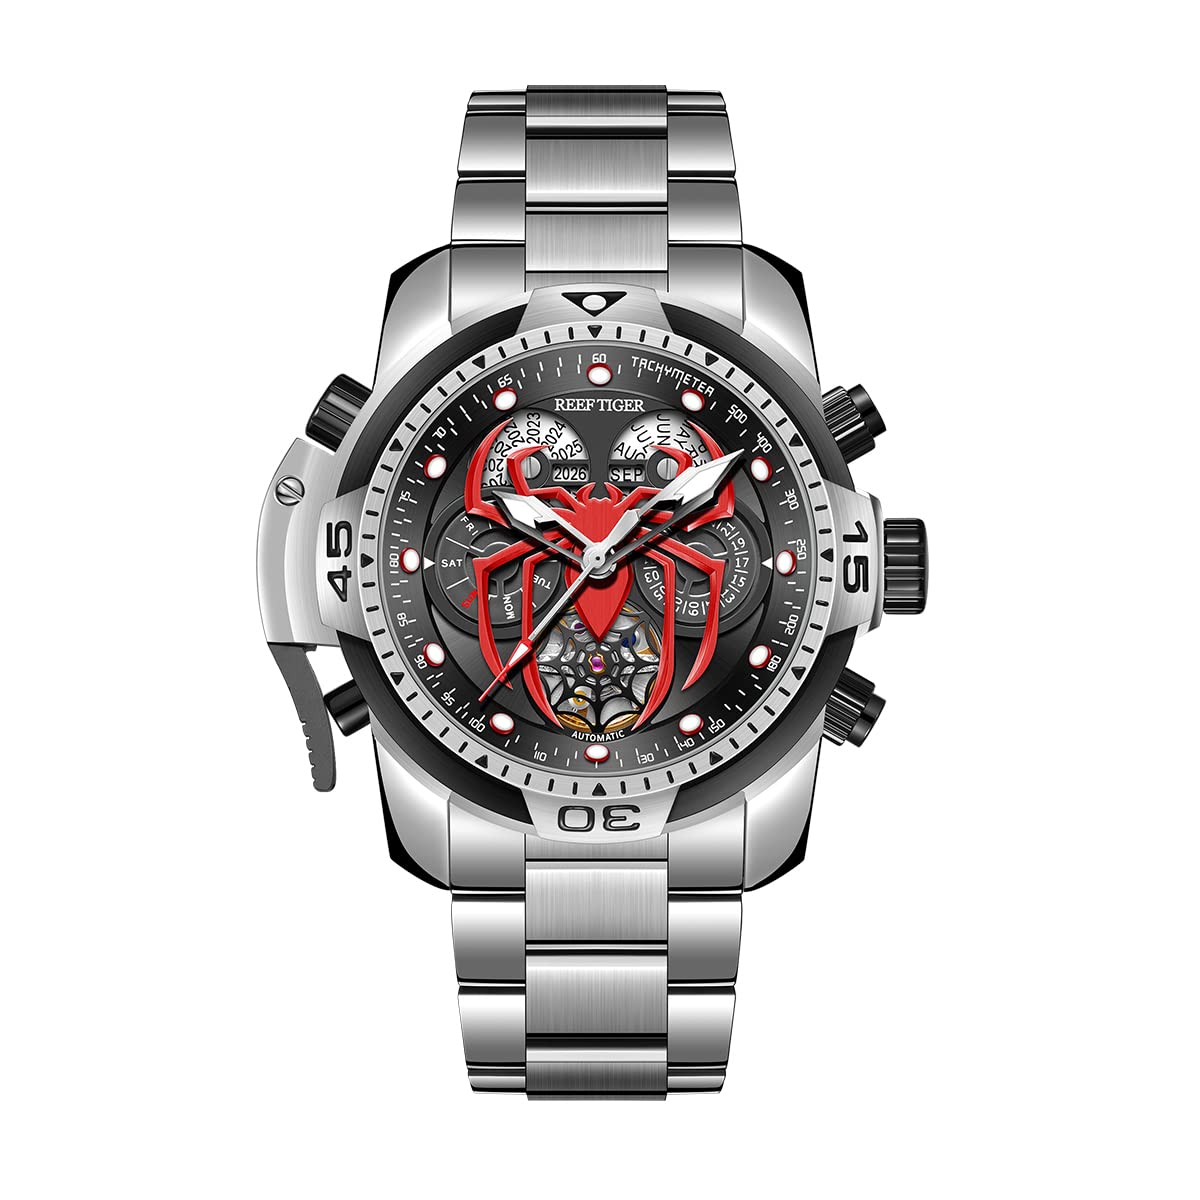 REEF TIGER Fashion Design Sport Automatic Mechanical Watch Spider Dial with Complicated Year Month Calendar Steel Bracelet Watches RGA3532SP